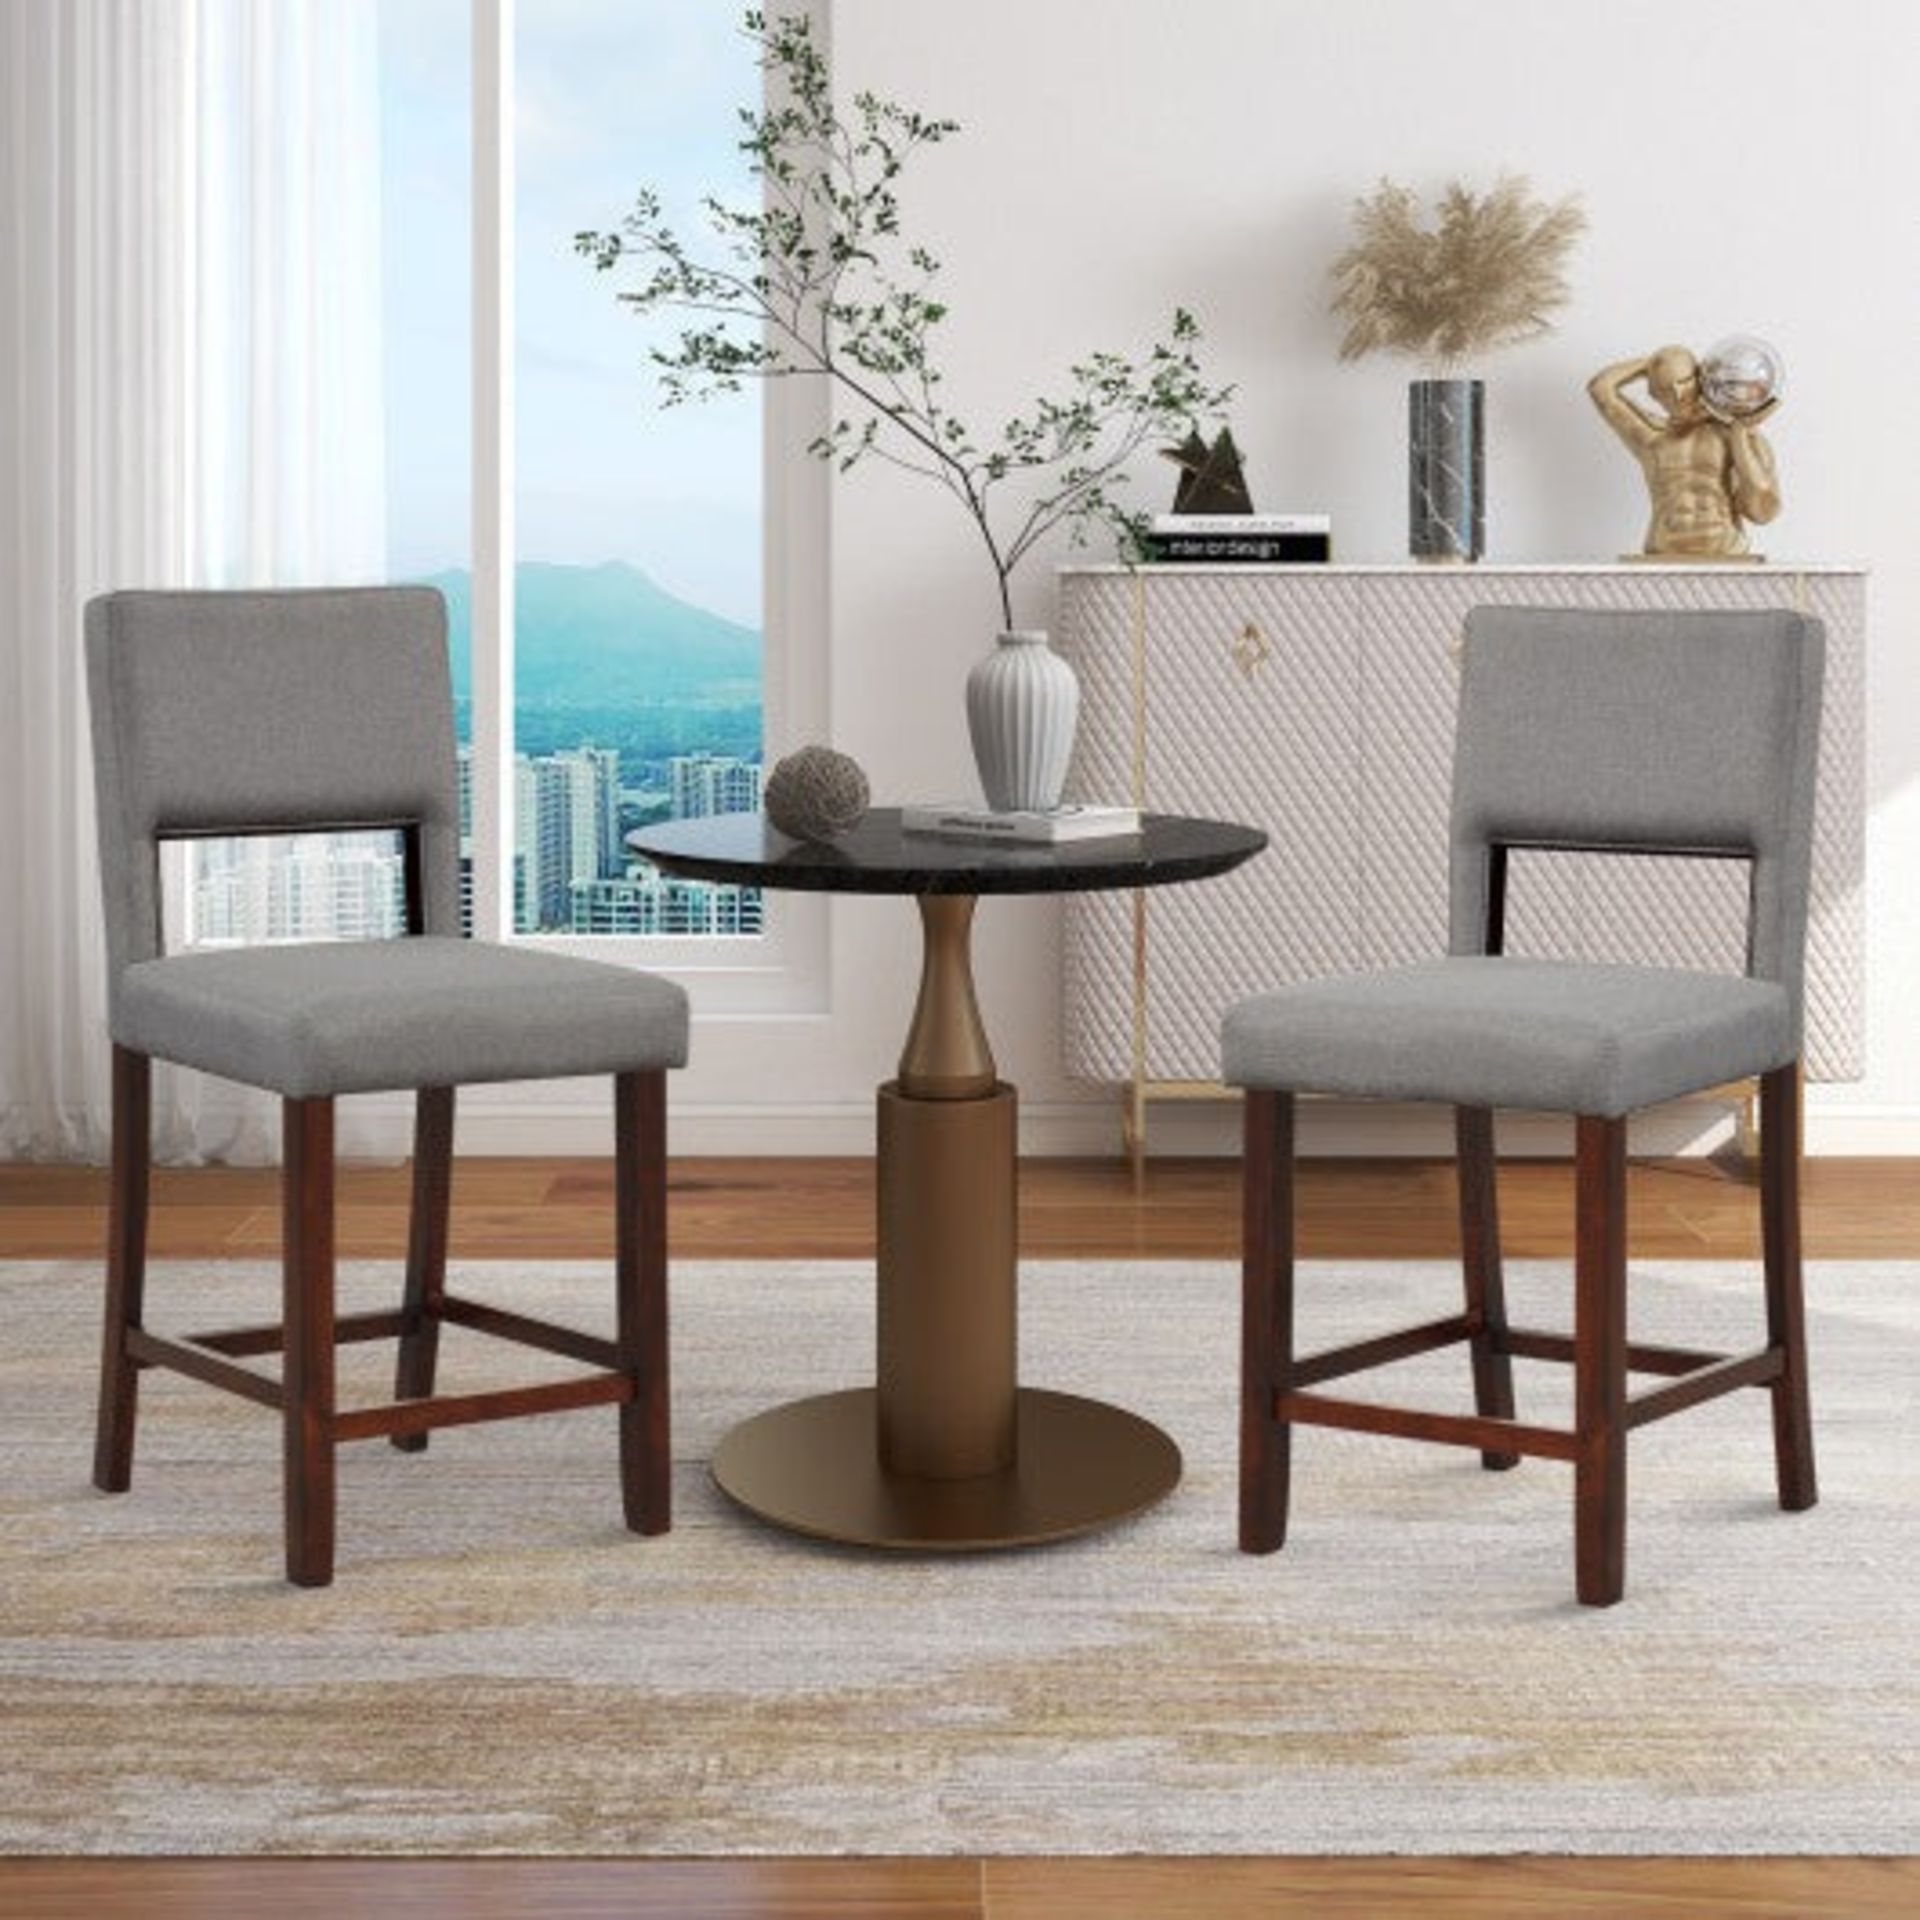 Gray Bar Chair Set with Hollowed Back and Rubber Wood Legs - ER53